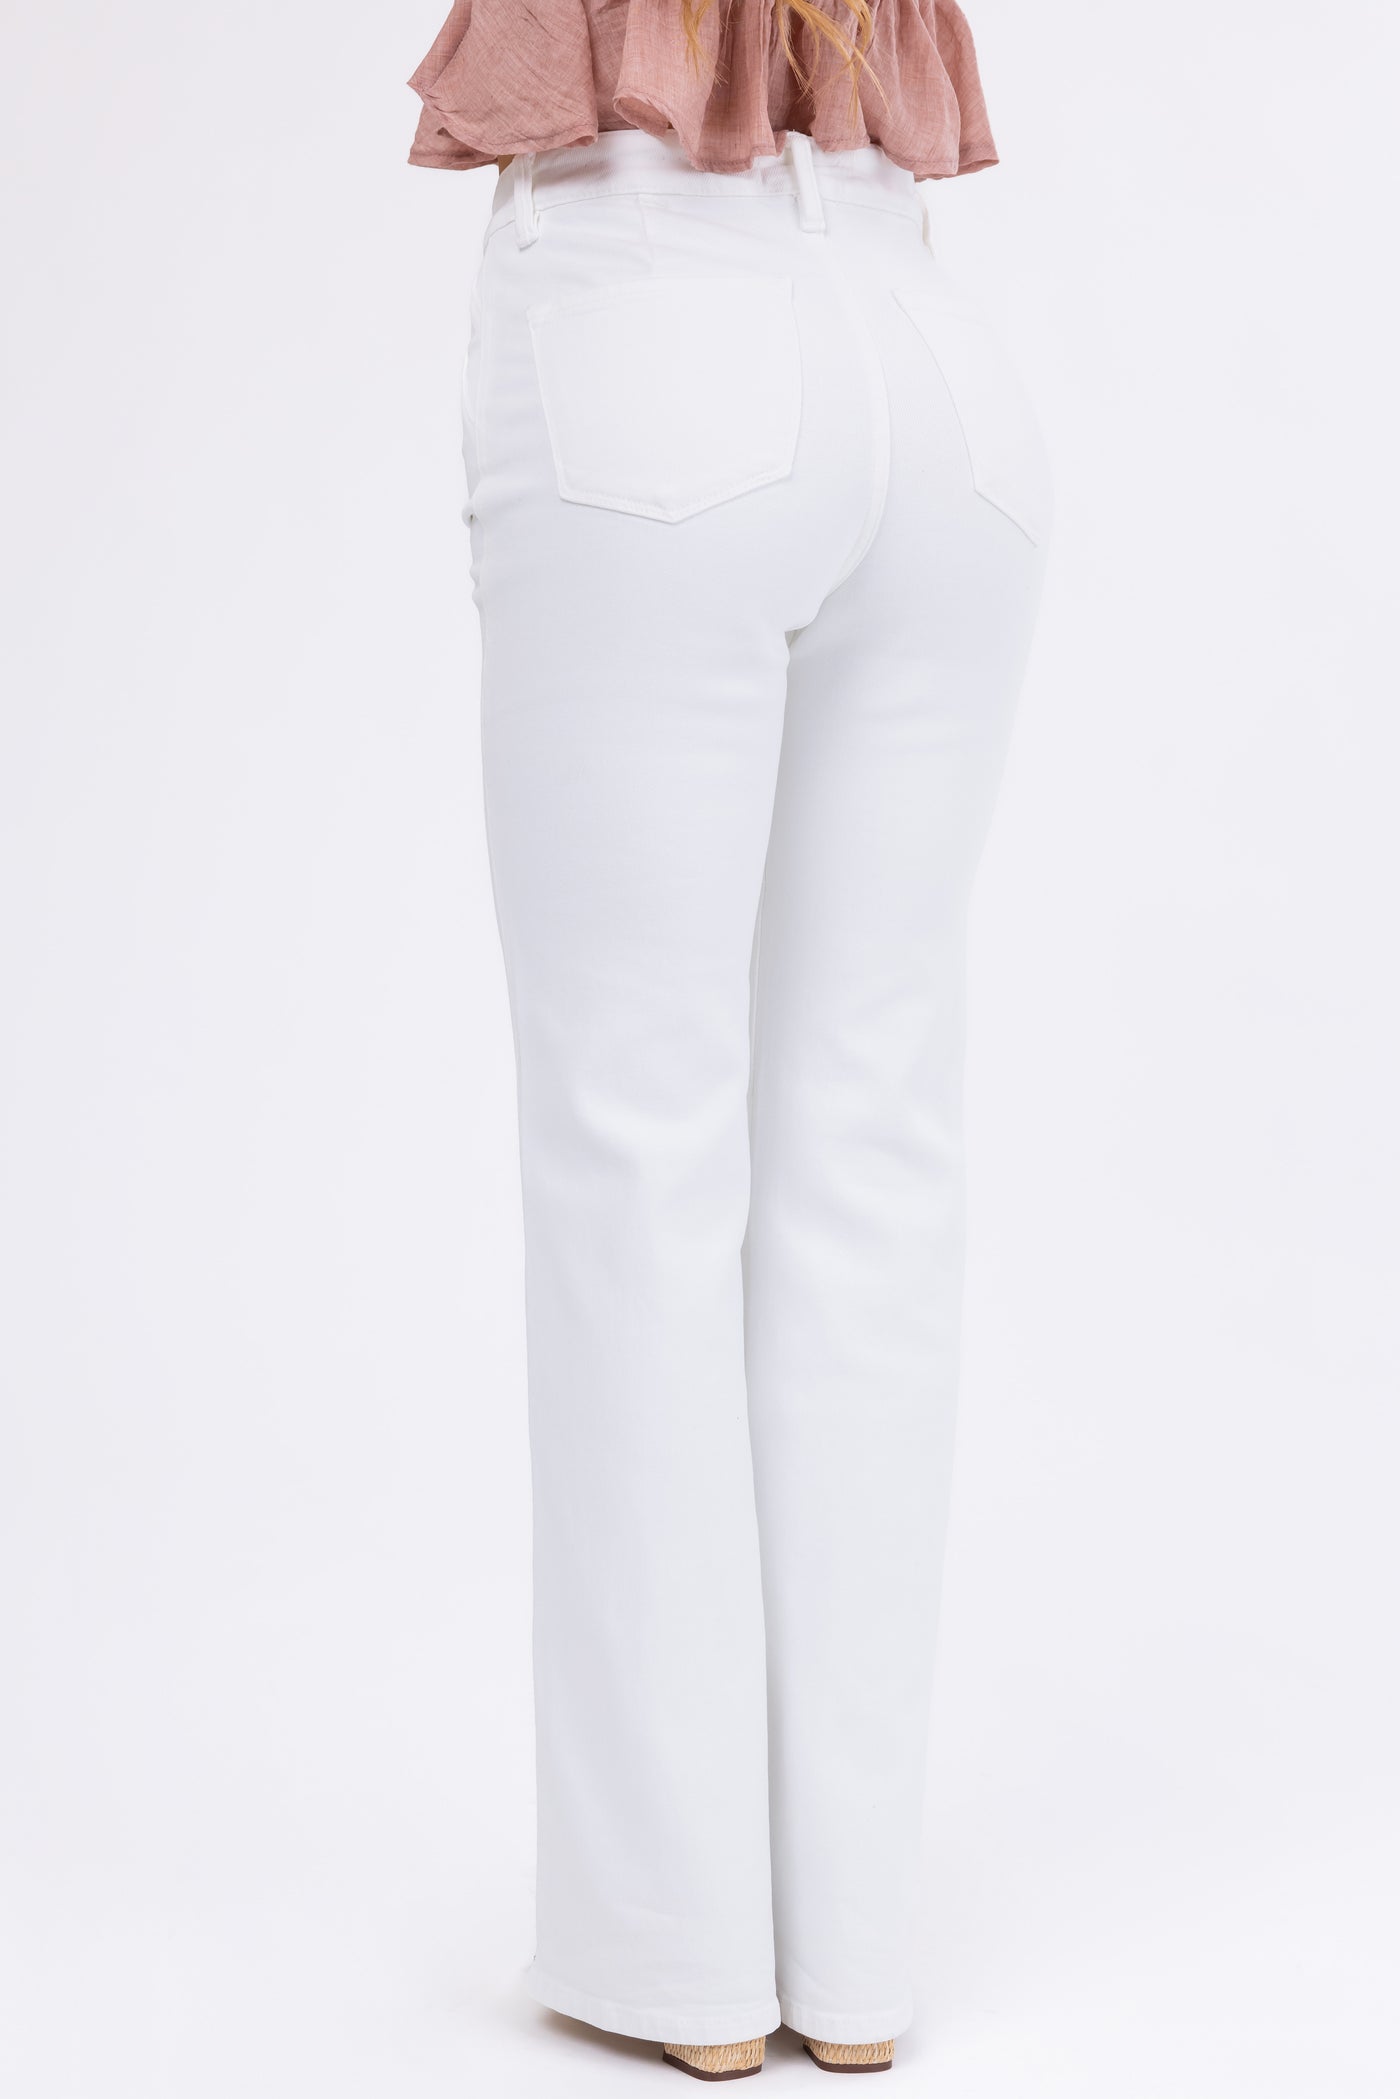 KanCan Off White Ultra High Rise Flare Jeans